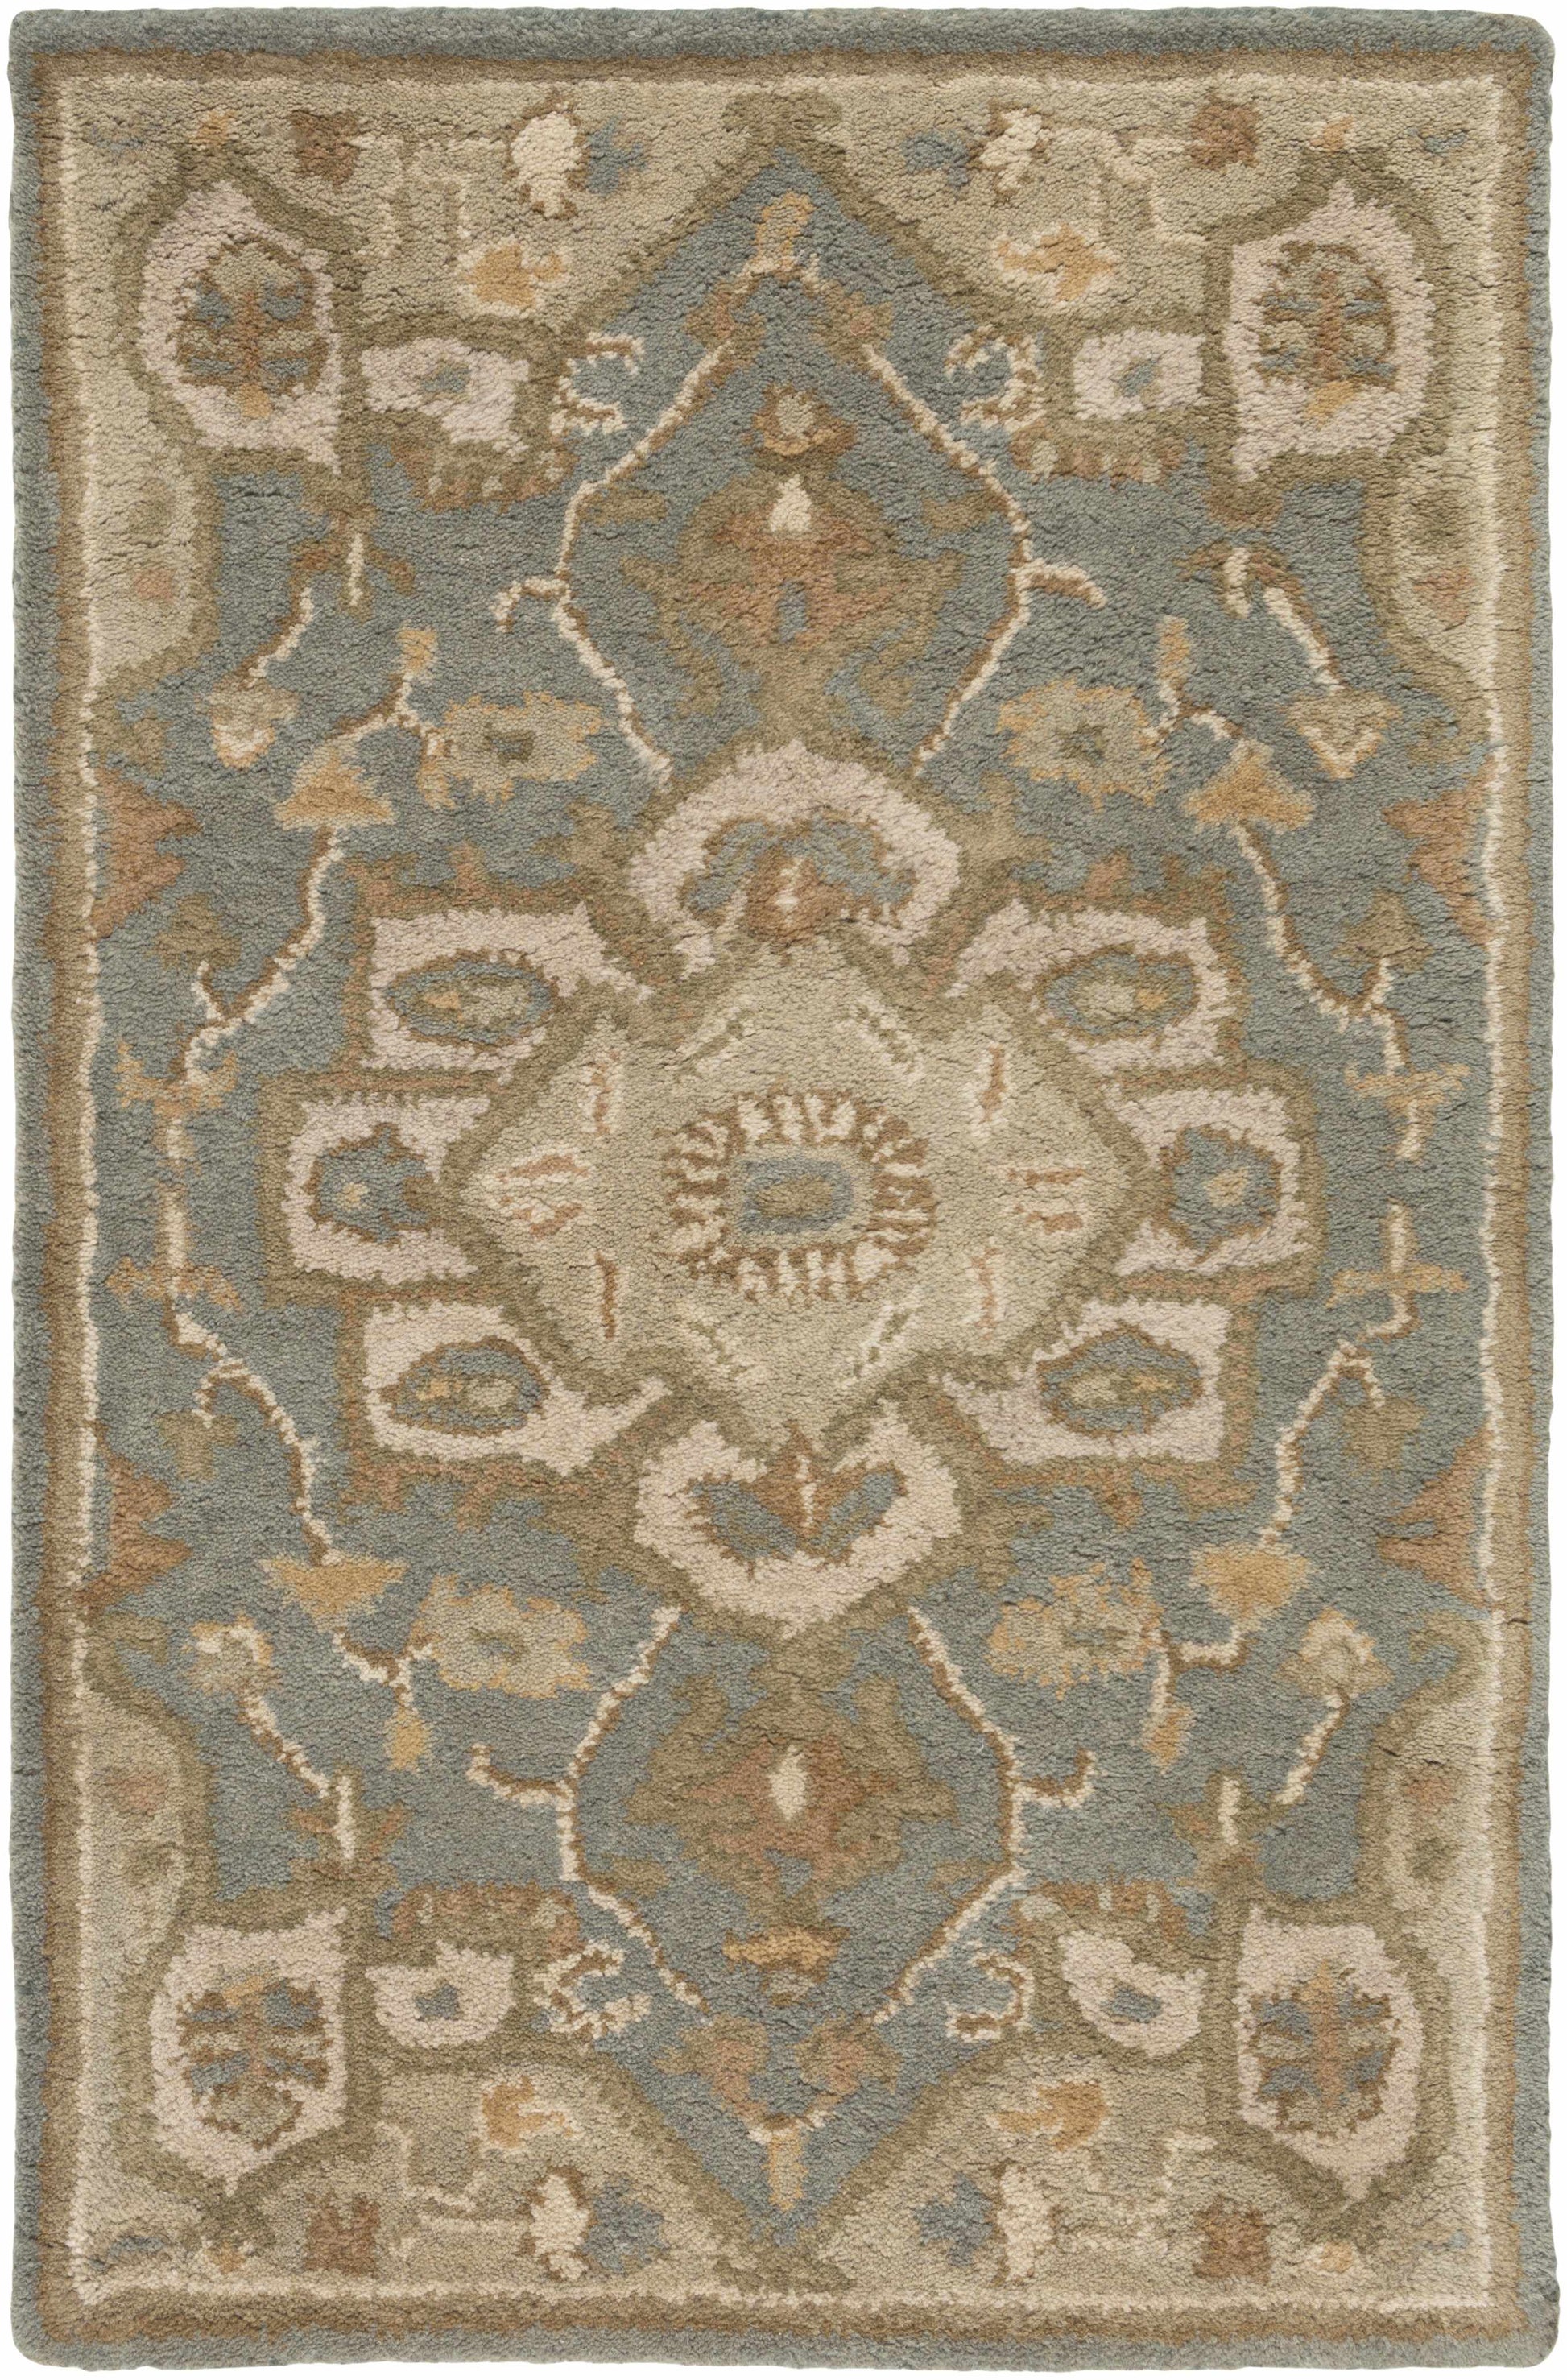 Boutique Rugs Rugs 2' x 3' Rectangle Broomfield Gray 1144 Wool Area Rug